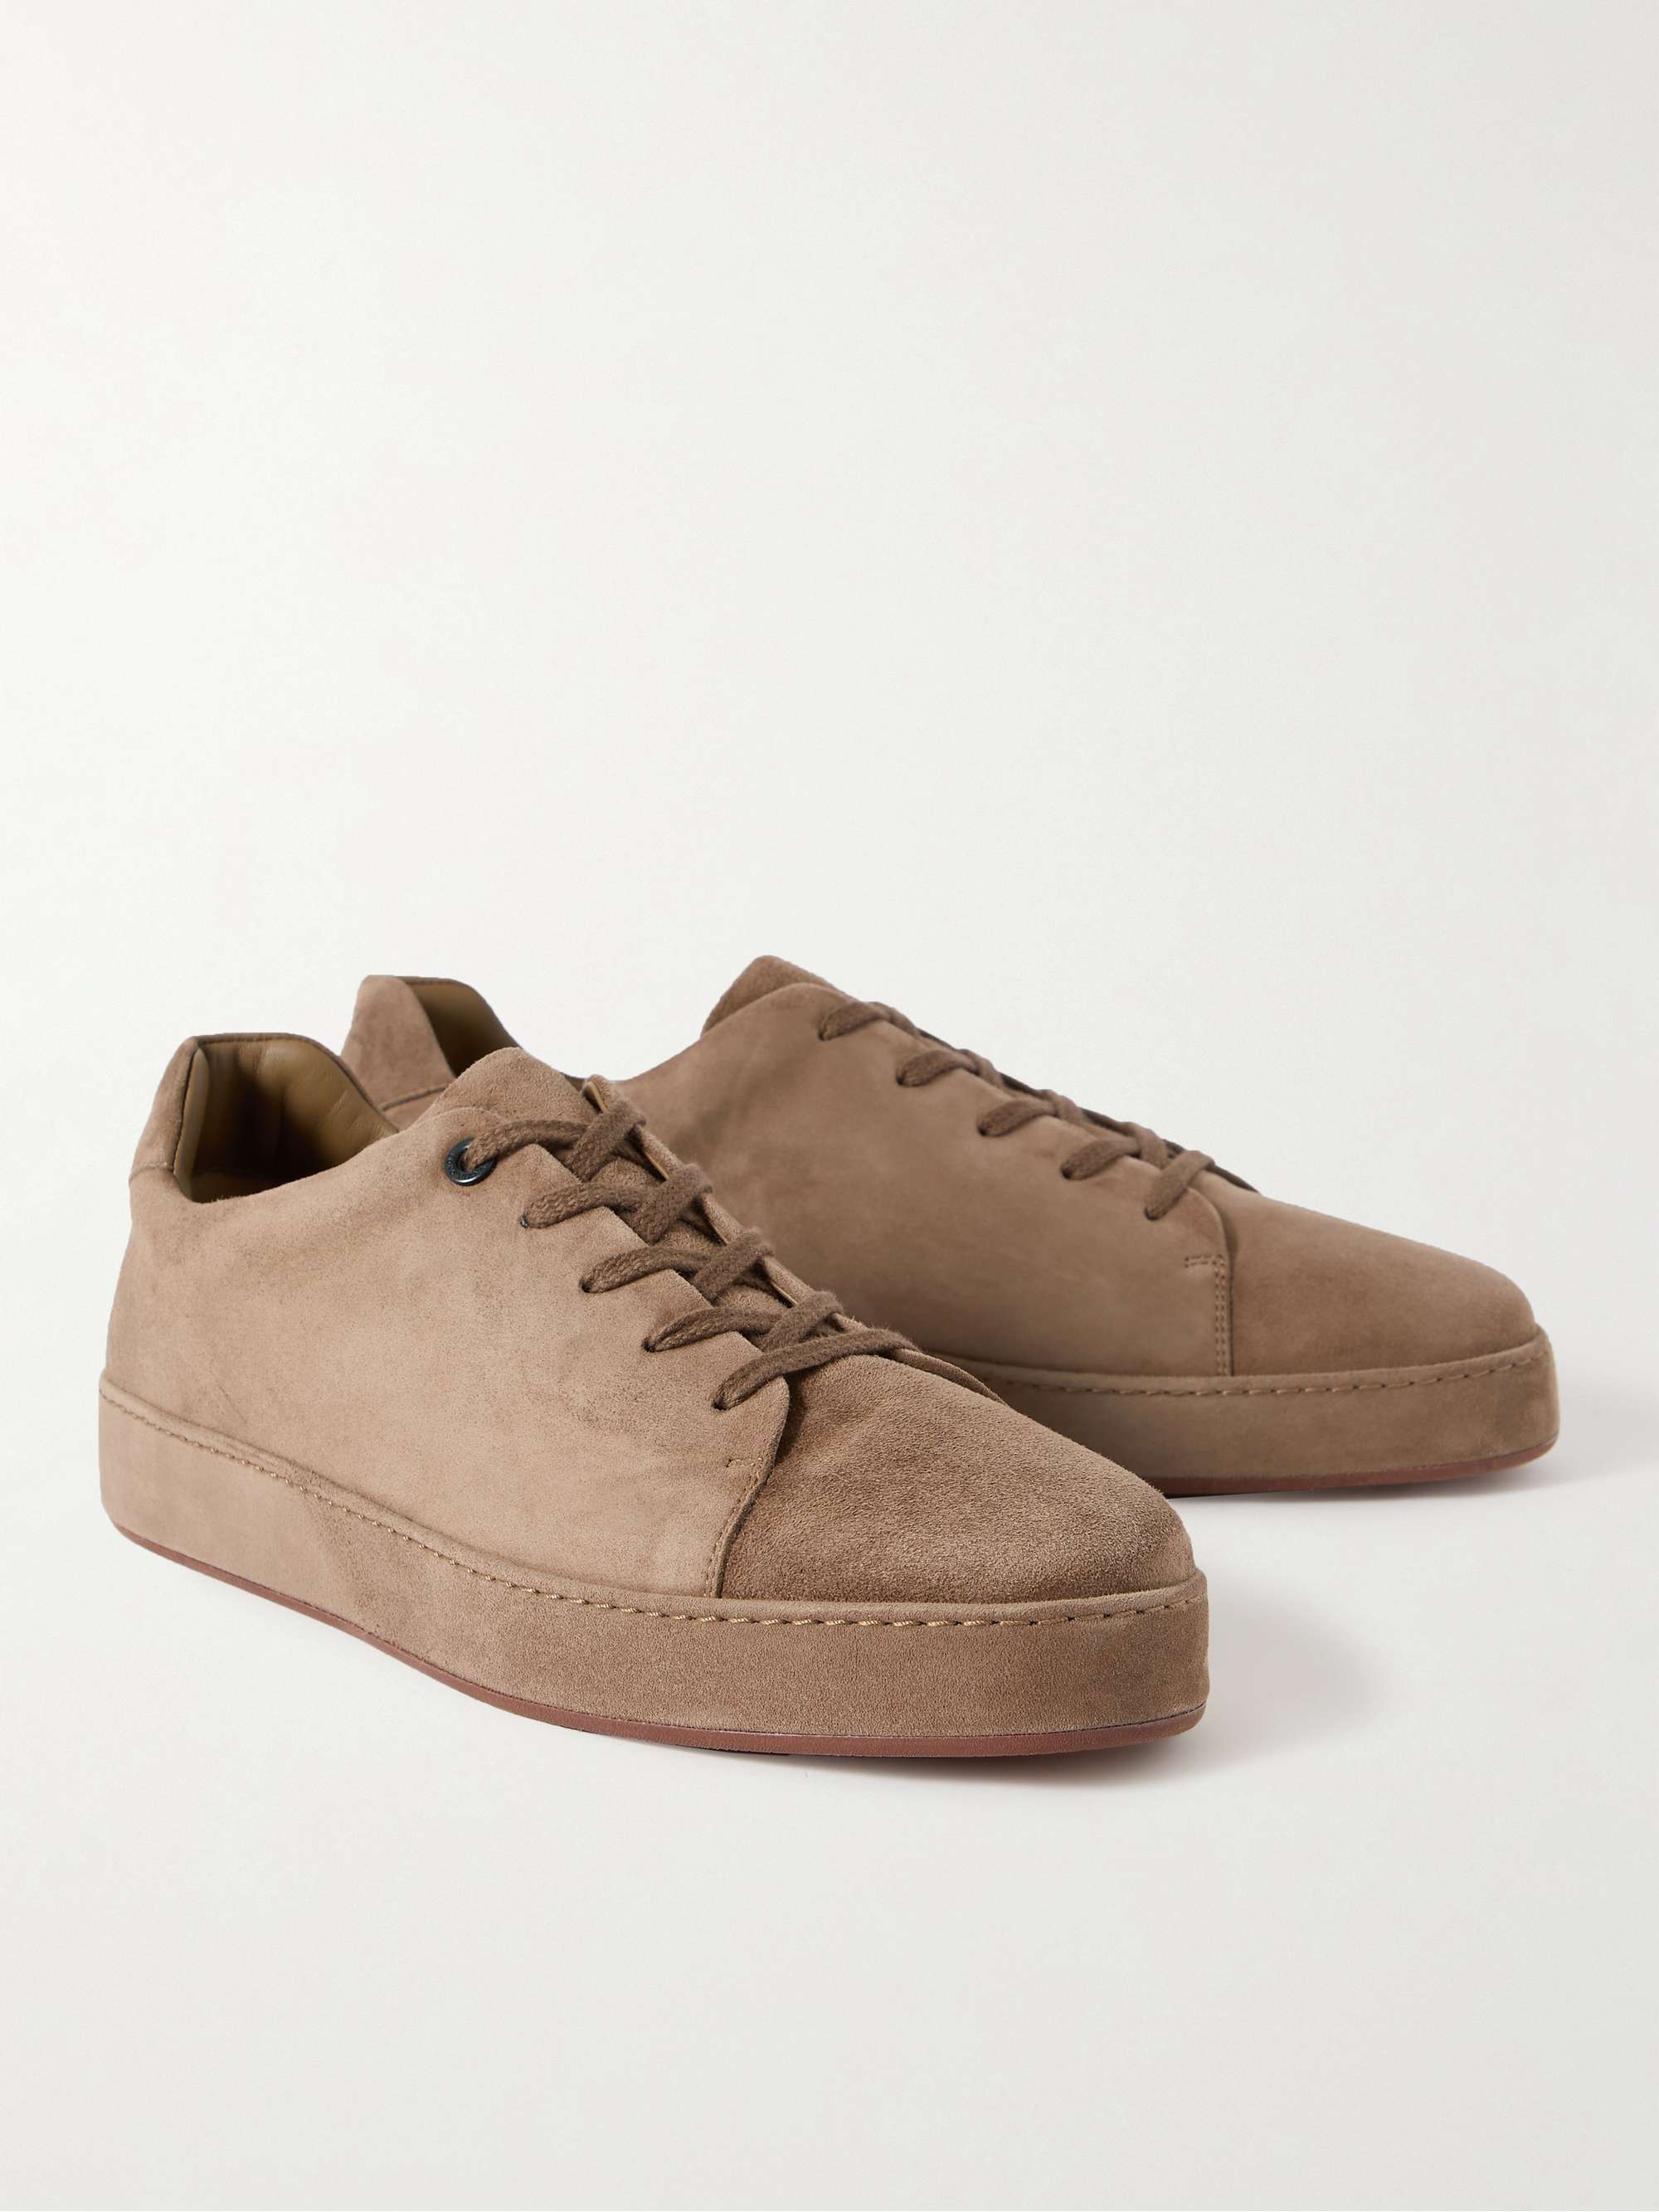 LORO PIANA Nuages Suede Sneakers